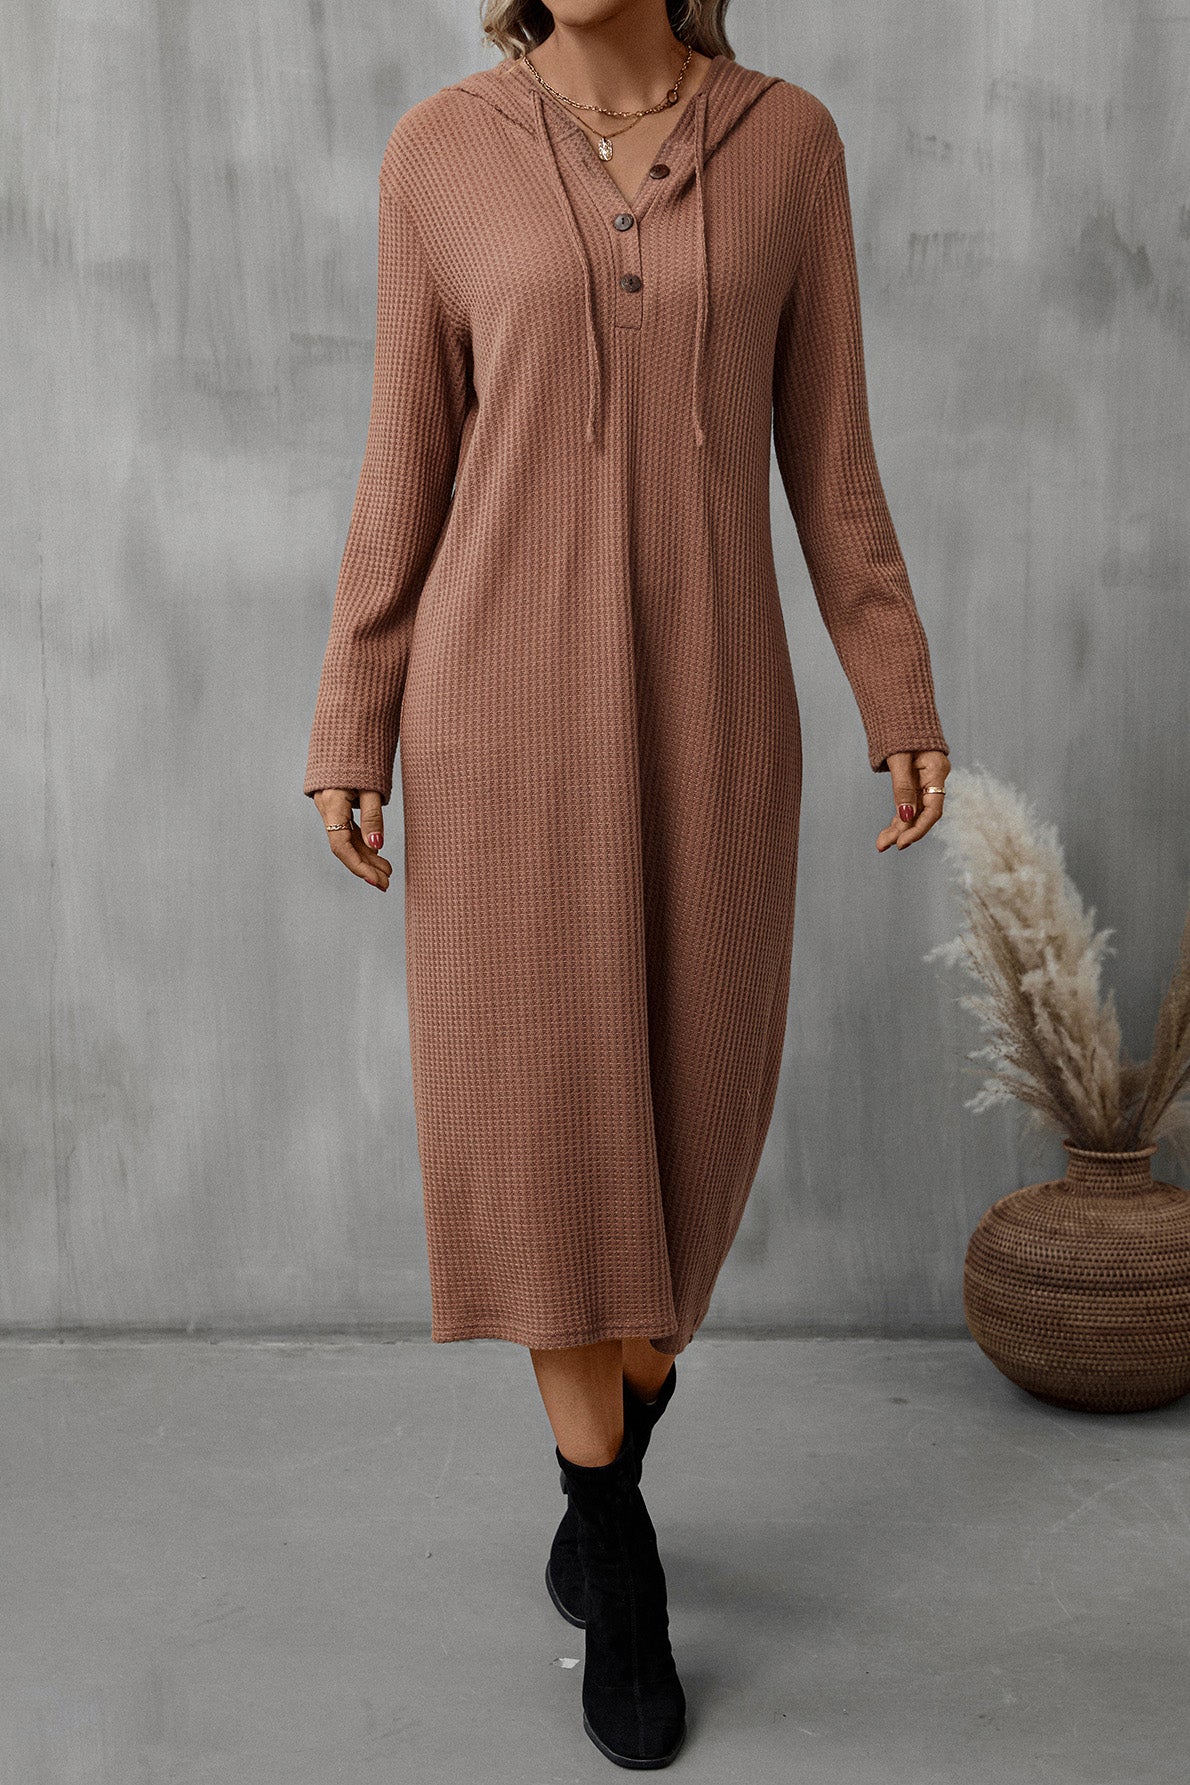 Buttoned Long Sleeve Hooded Dress - Lola Cerina Boutique